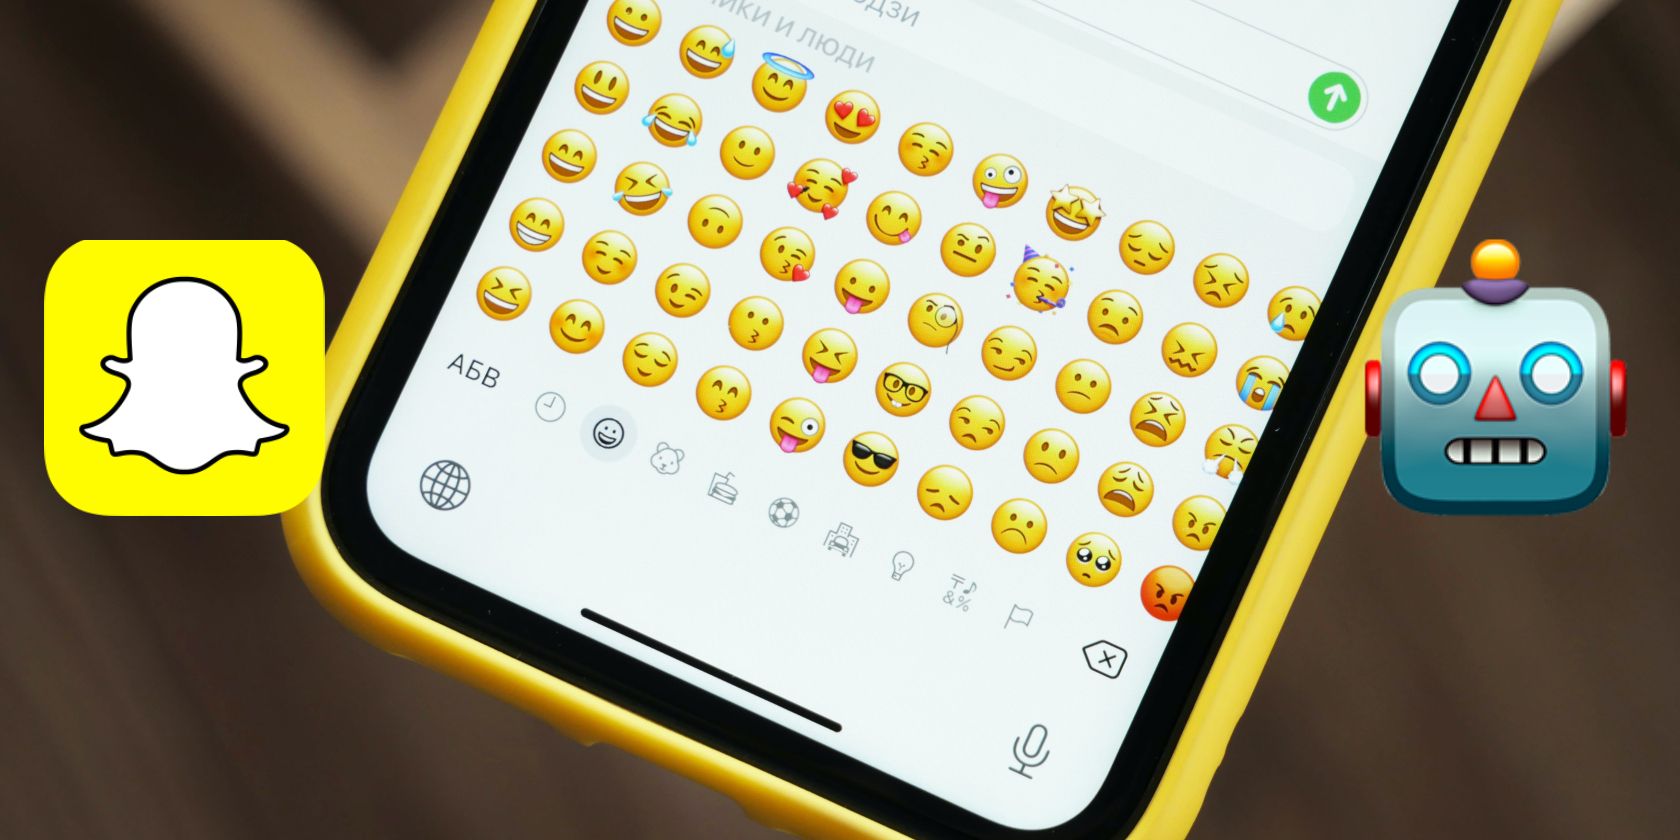 A phone displaying emojis with the Snapchat logo on the left and robot emoji on the right